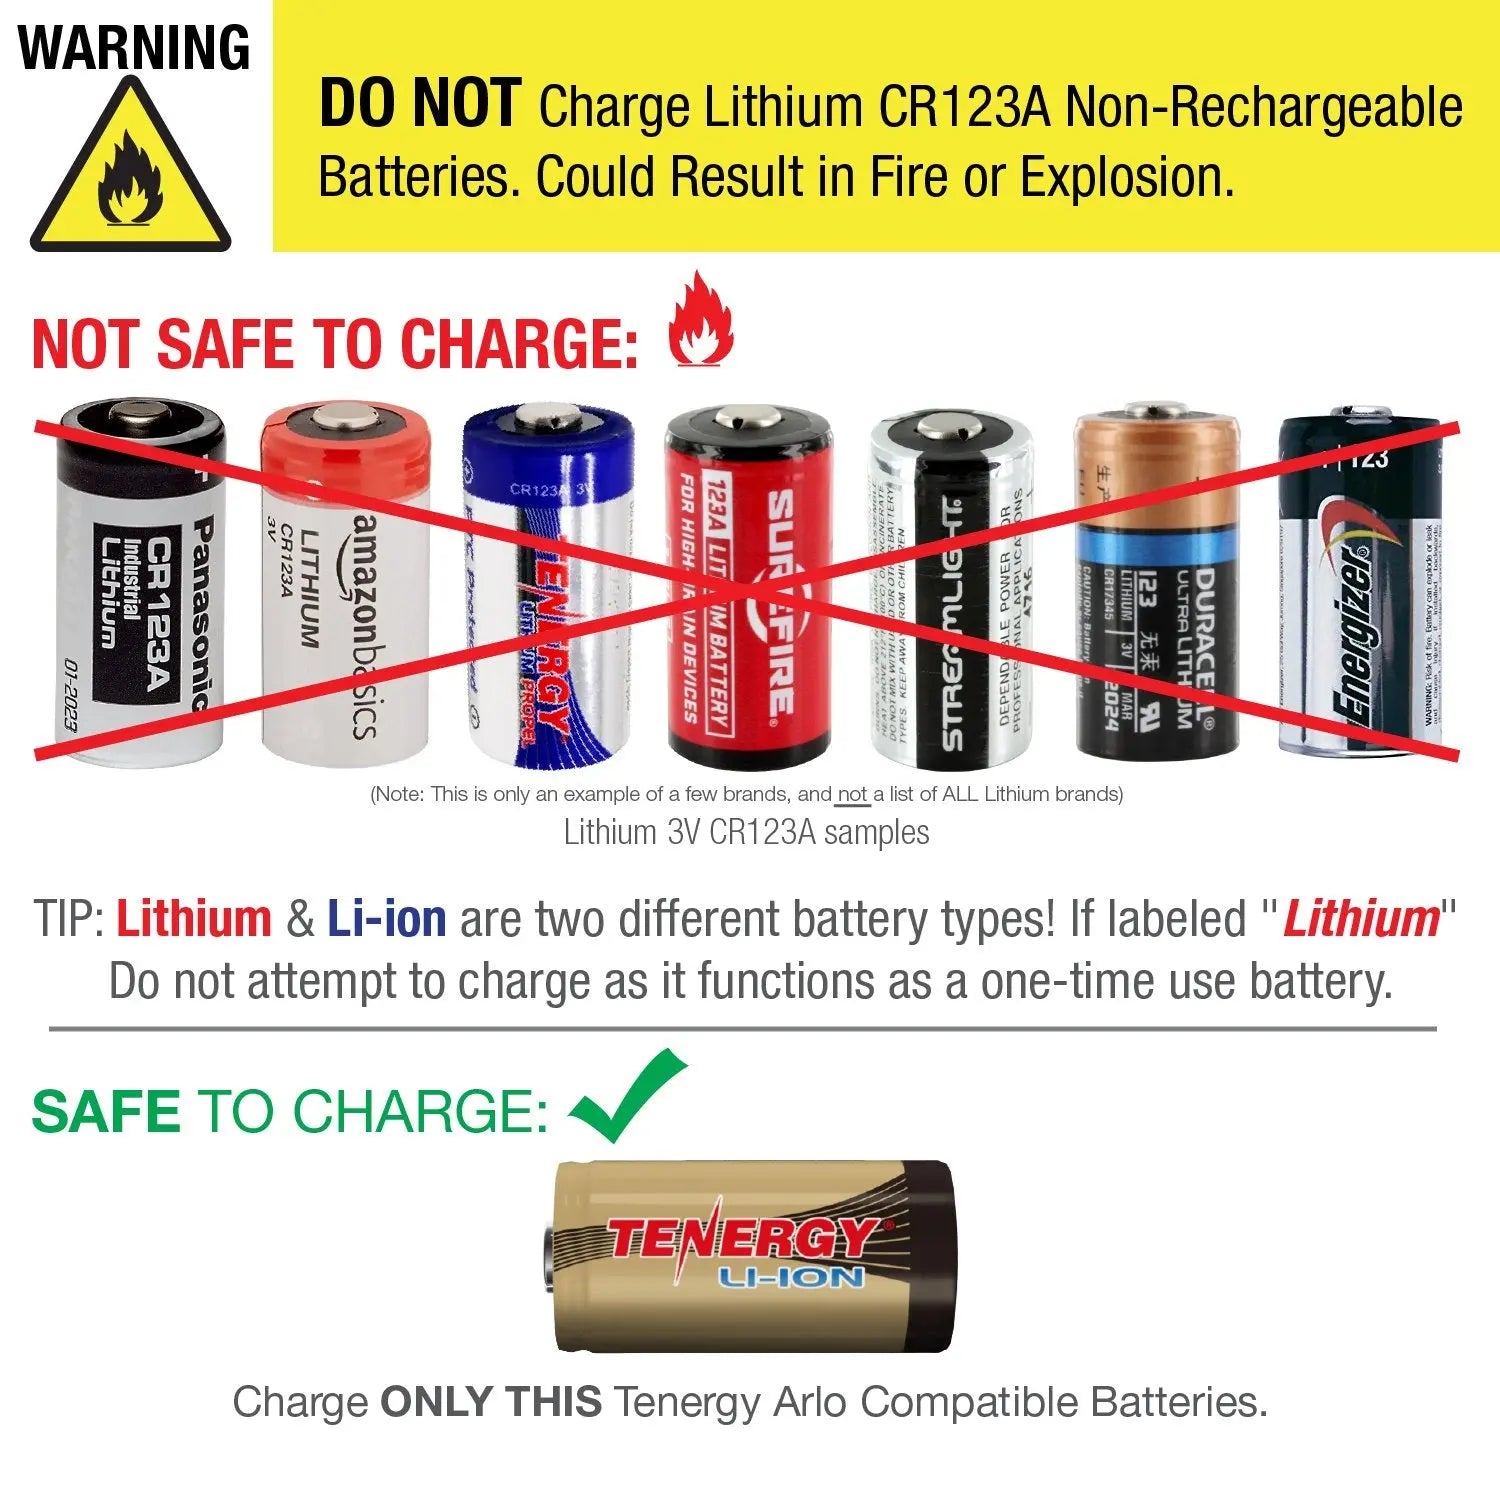 osing Other batteries effects your warrenty